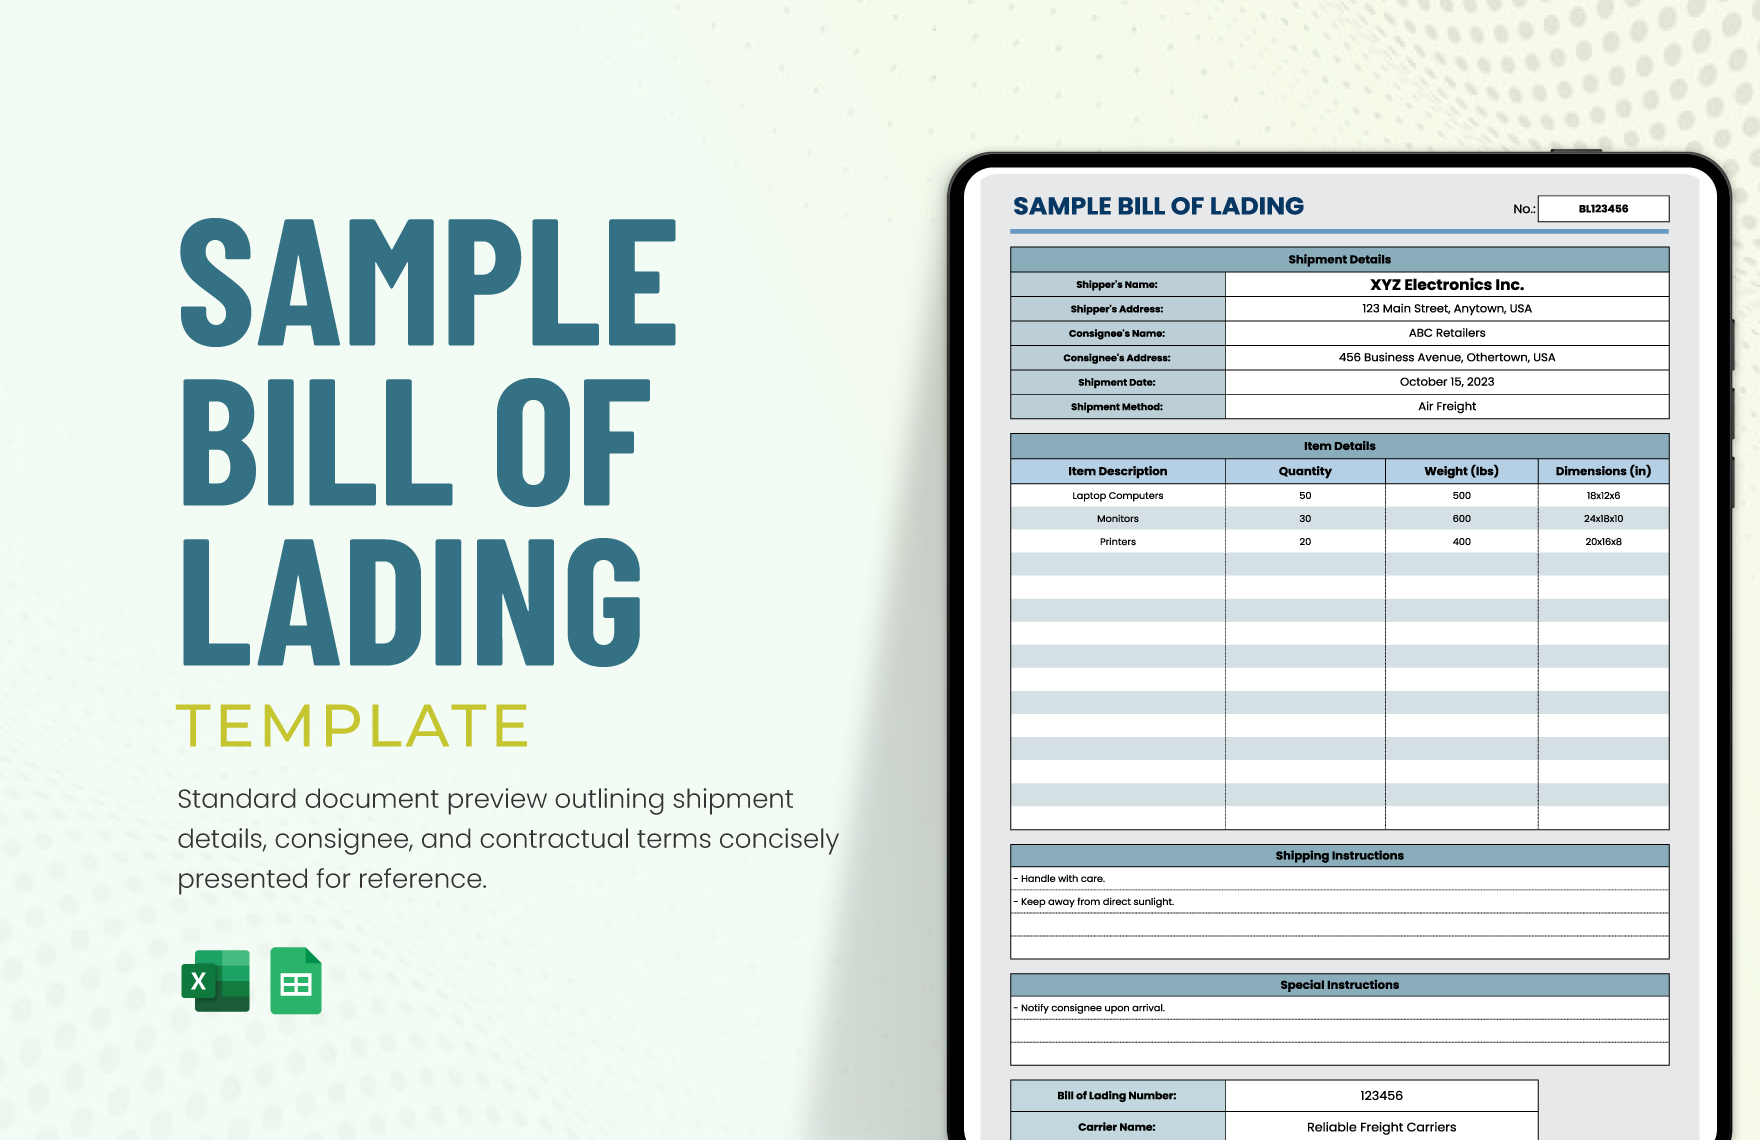 Sample Bill of Lading Template